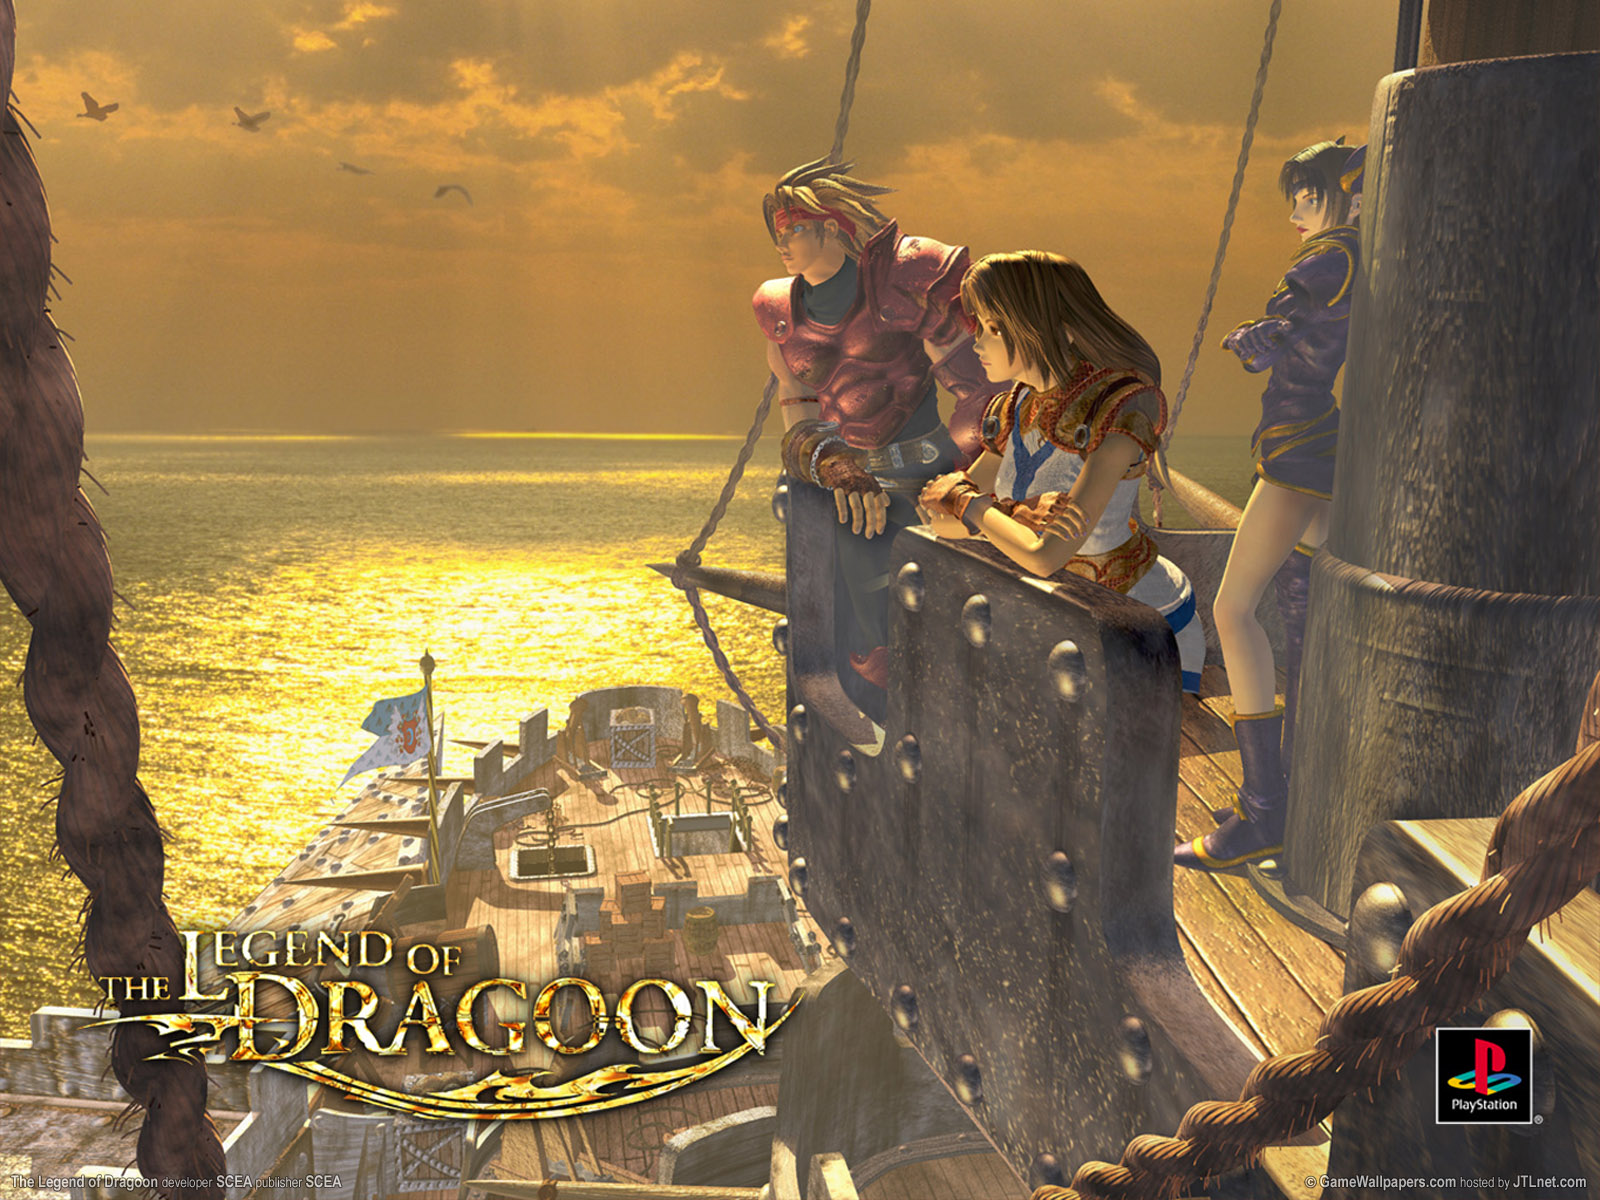 The Legend Of Dragoon Backgrounds, Compatible - PC, Mobile, Gadgets| 1600x1200 px